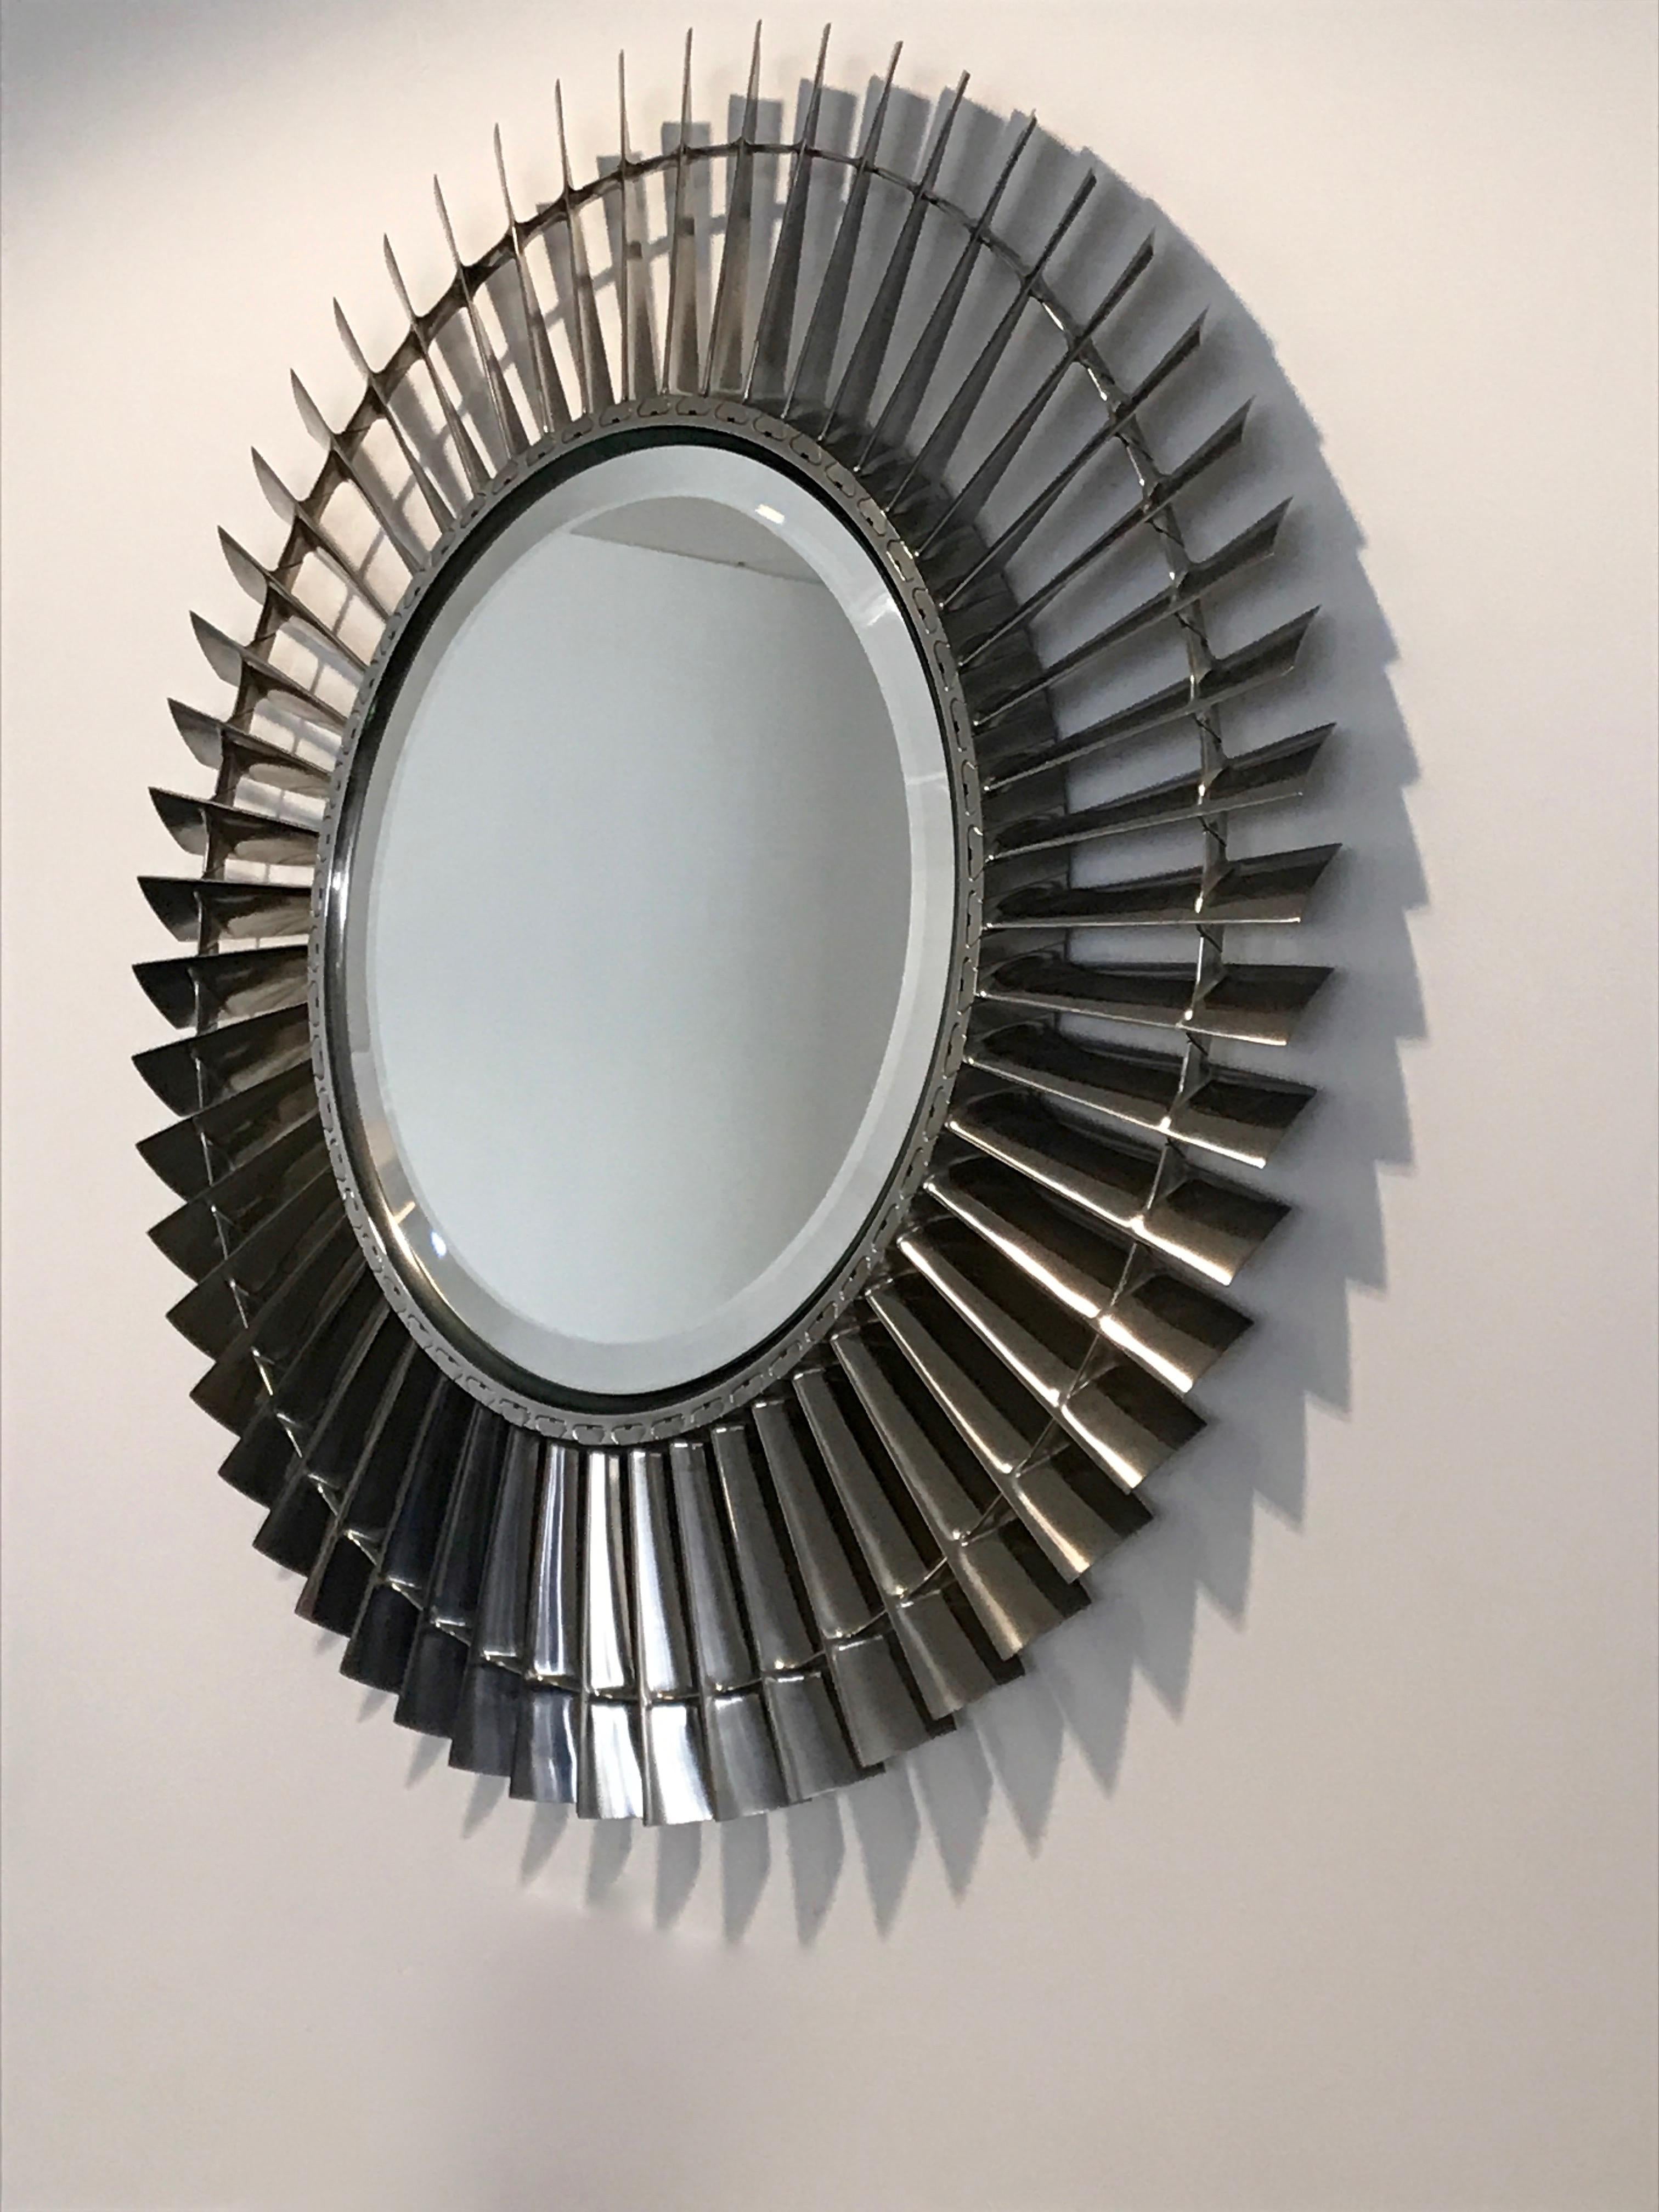 Crafted from a Military Specification Rolls Royce Spey jet engine our skilled craftsmen have created a very detailed, highly polished mirror from a LP5, (Low Pressure Compressor Fan). 53 Titanium fan blades mounted to its original hub with a bevel